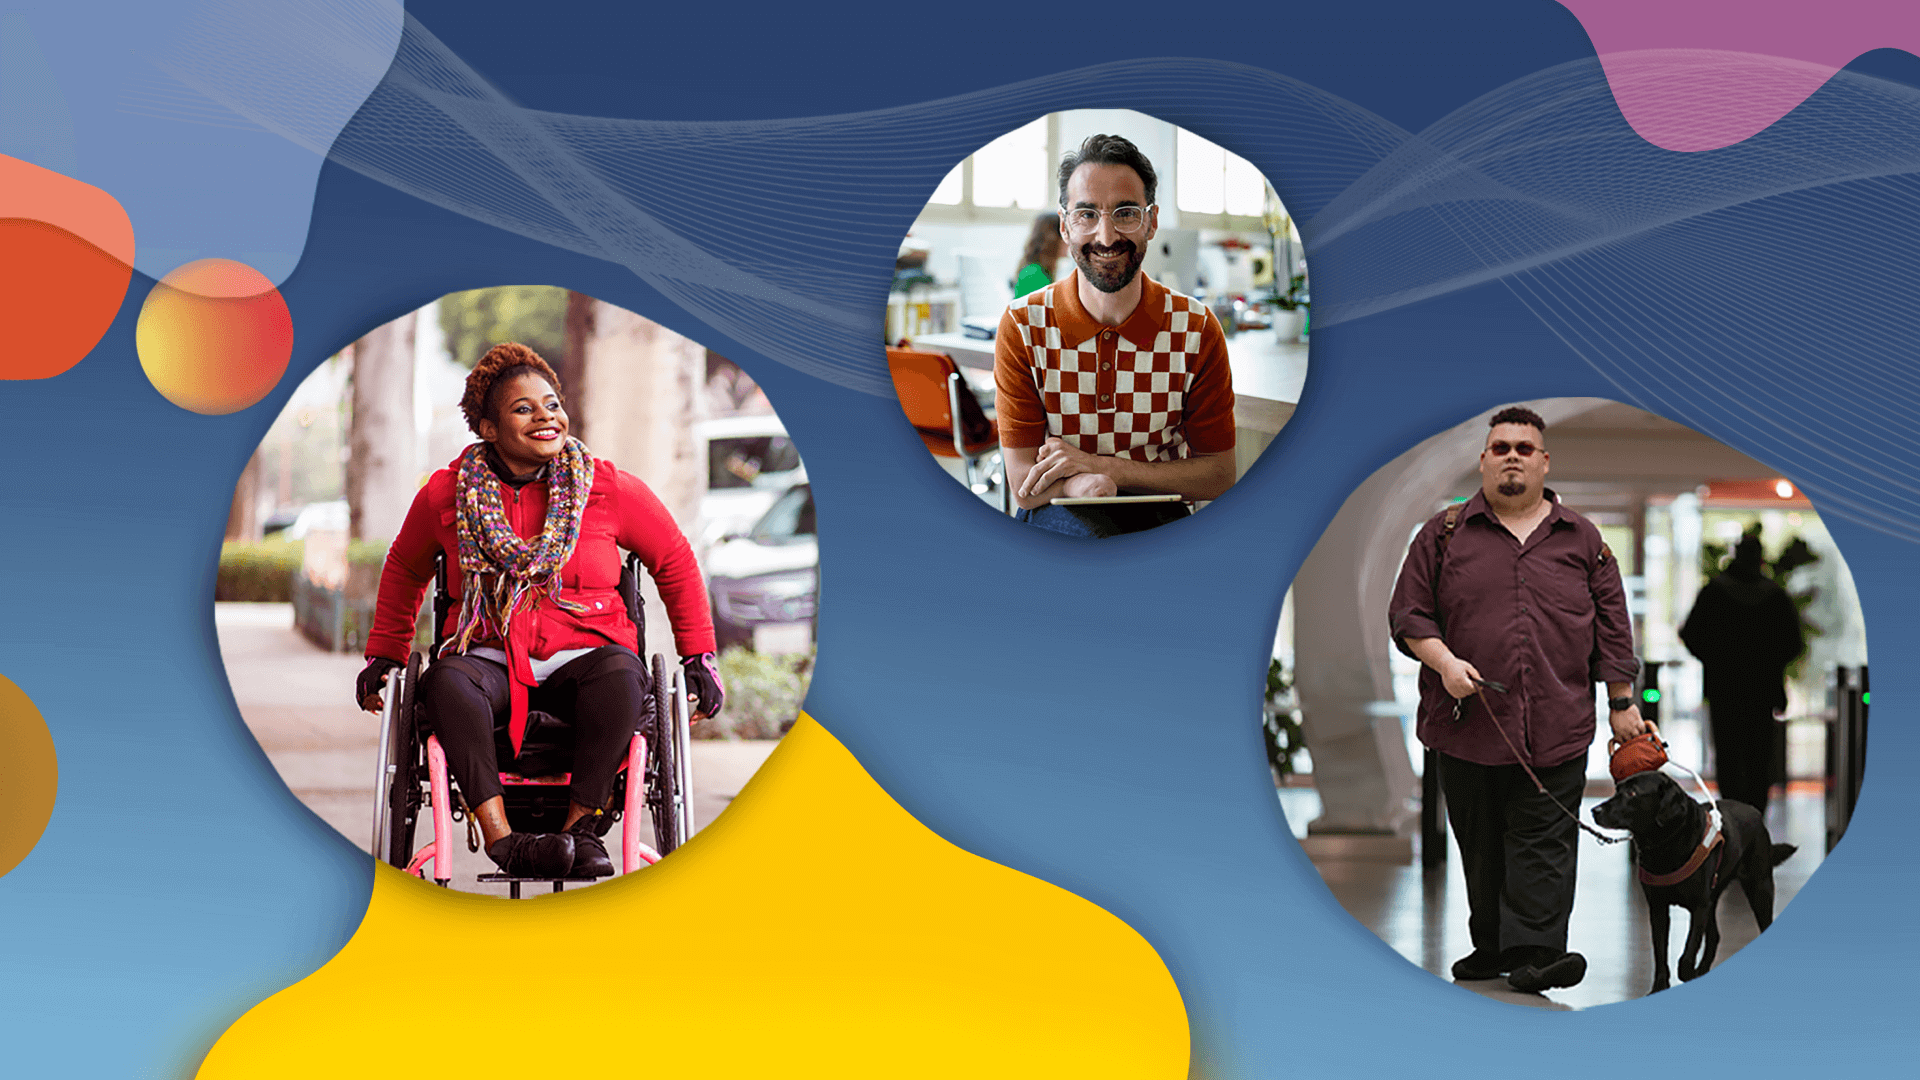 Inclusion is Innovation: Disability Community image collage of people